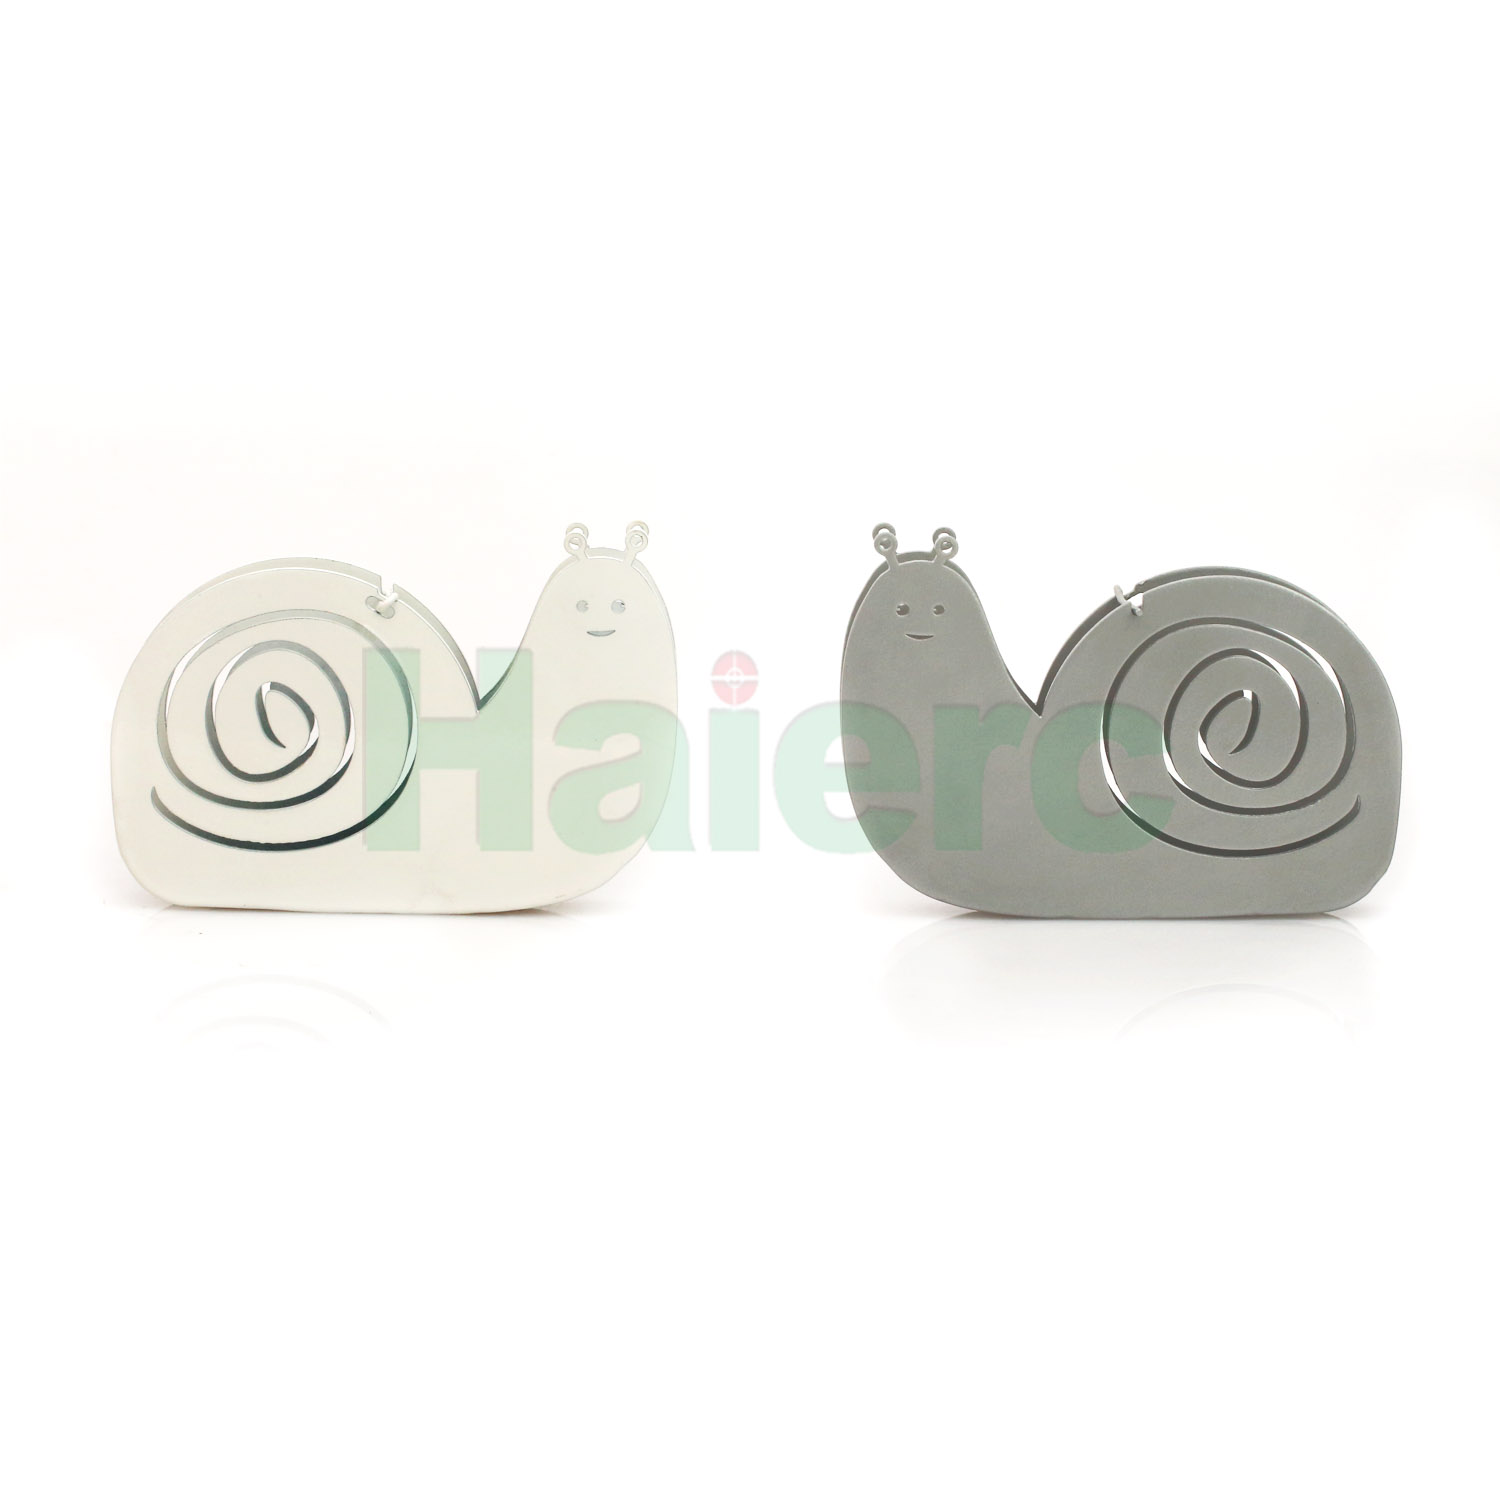 Haierc wrought iron mosquito coil holder mosquito coil box household mosquito coil tray HC6305